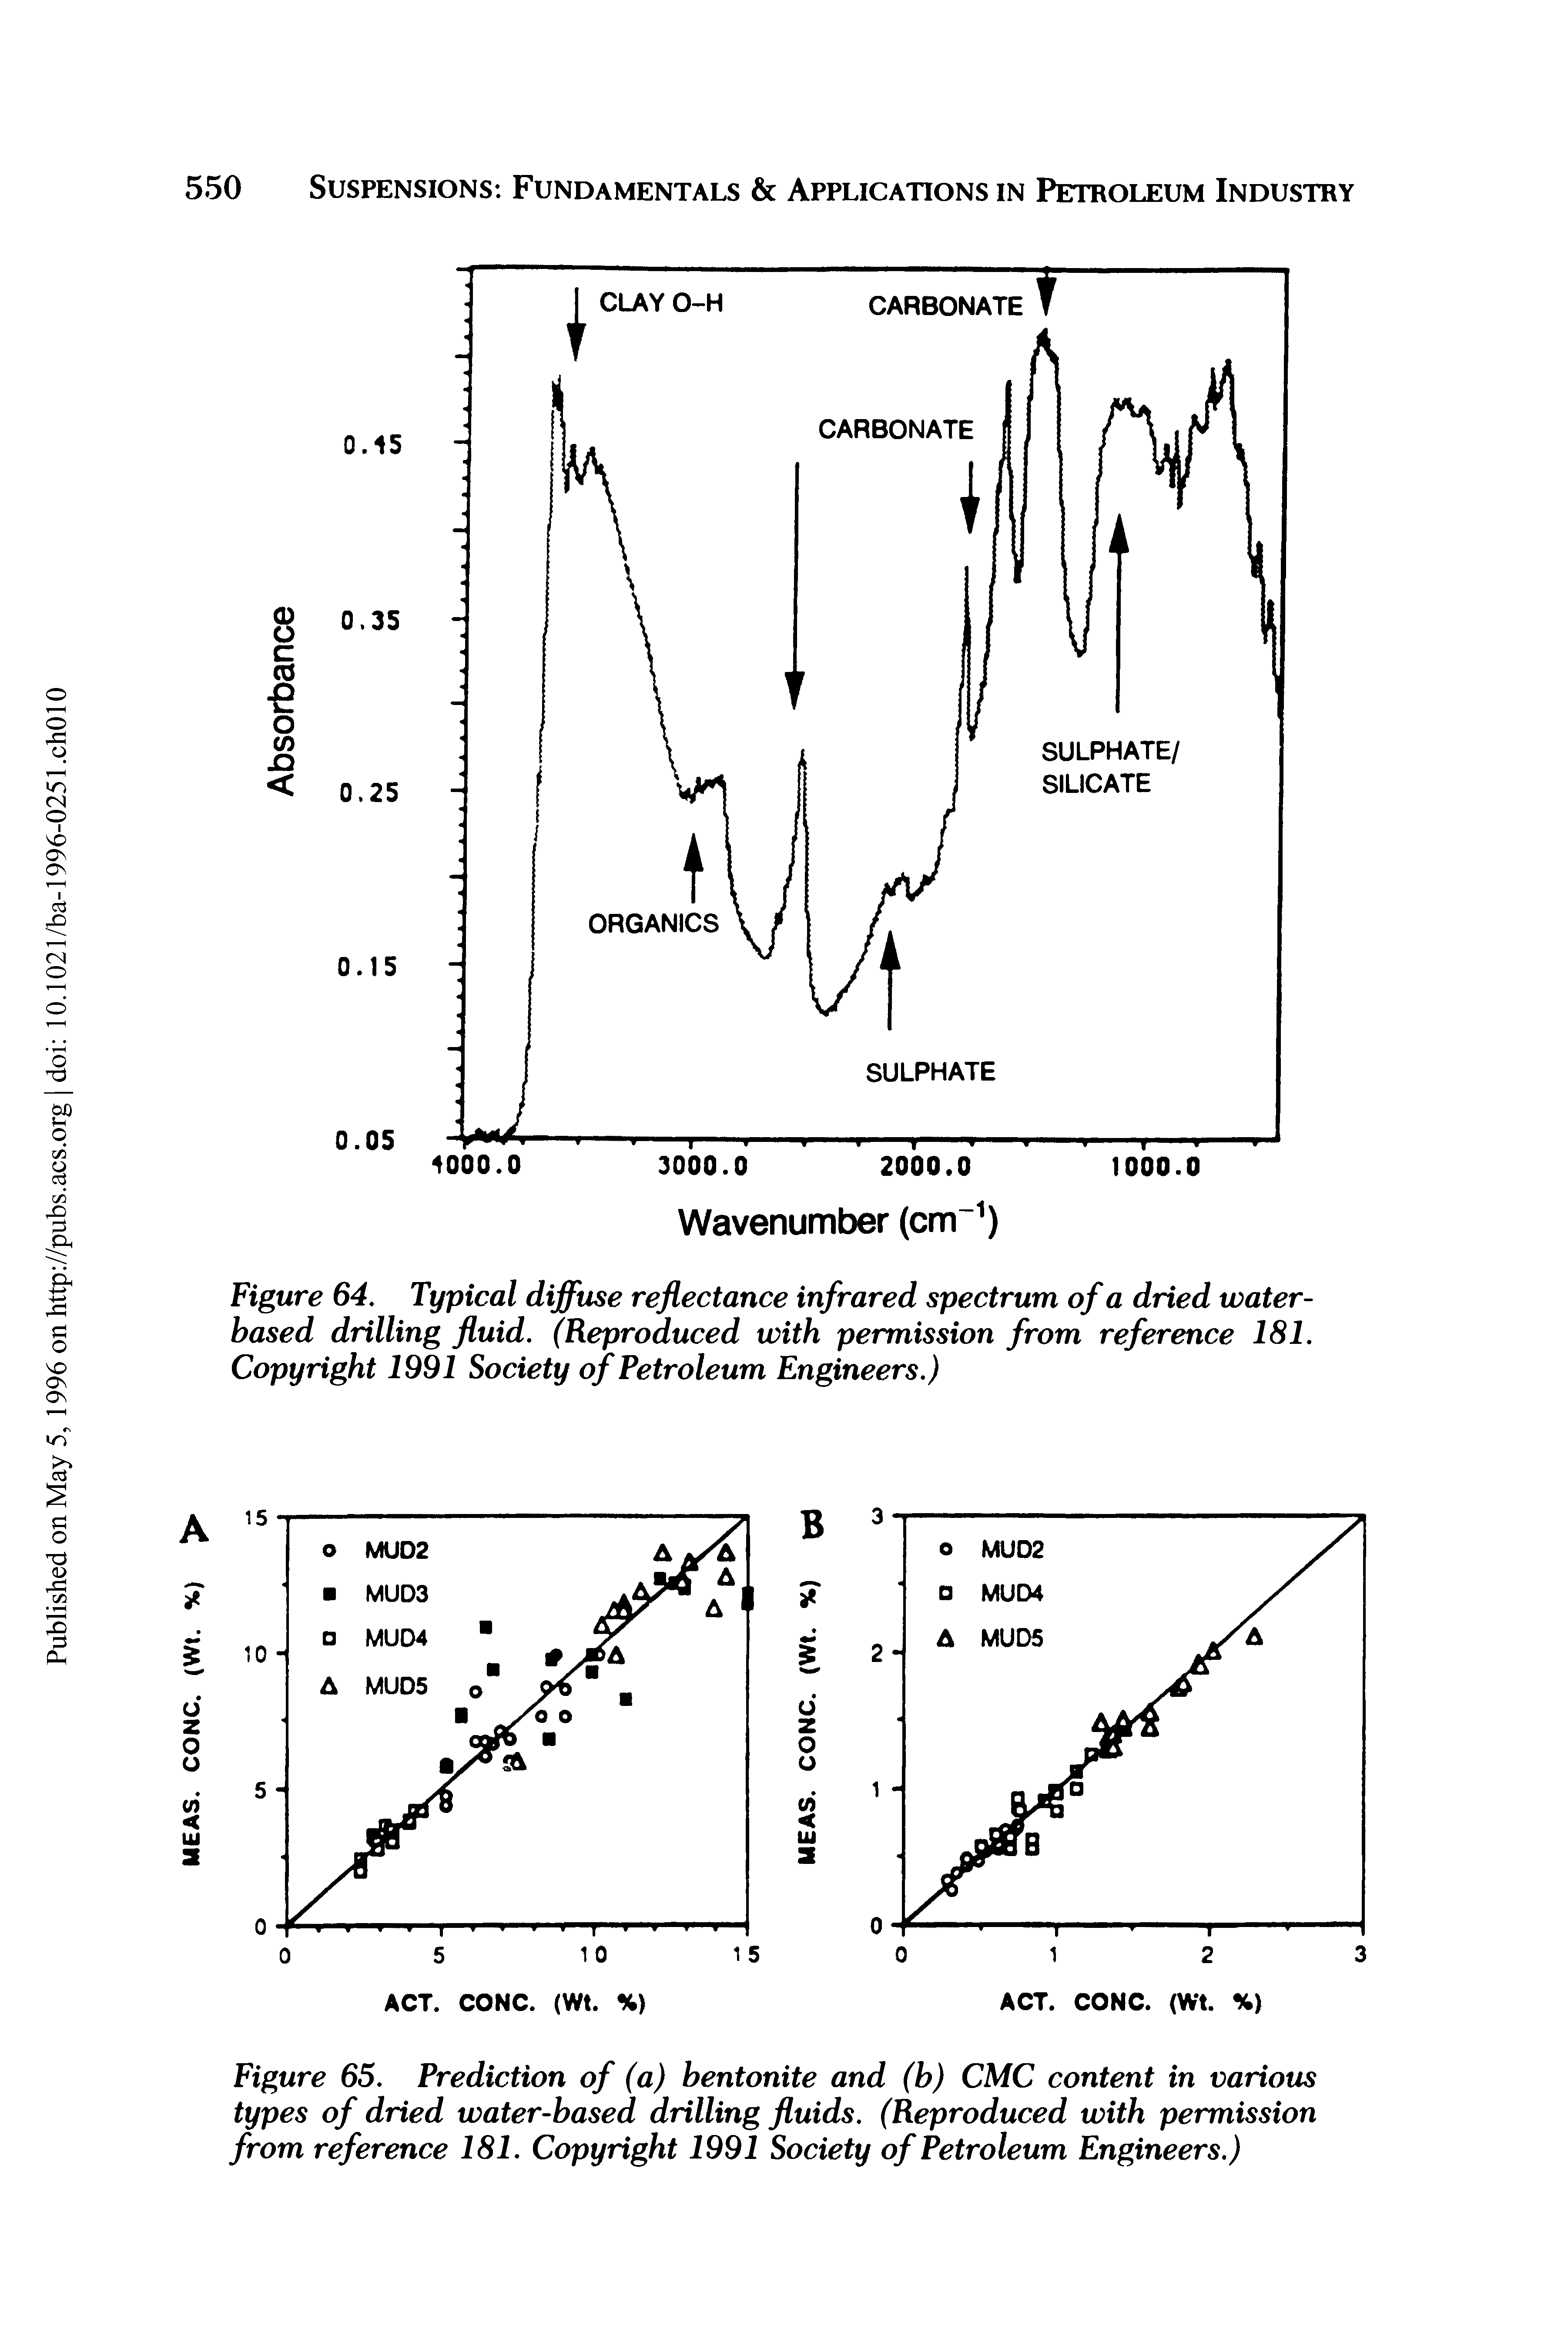 Figure 64. Typical diffuse reflectance infrared spectrum of a dried water-based drilling fluid. (Reproduced with permission from reference 181. Copyright 1991 Society of Petroleum Engineers.)...